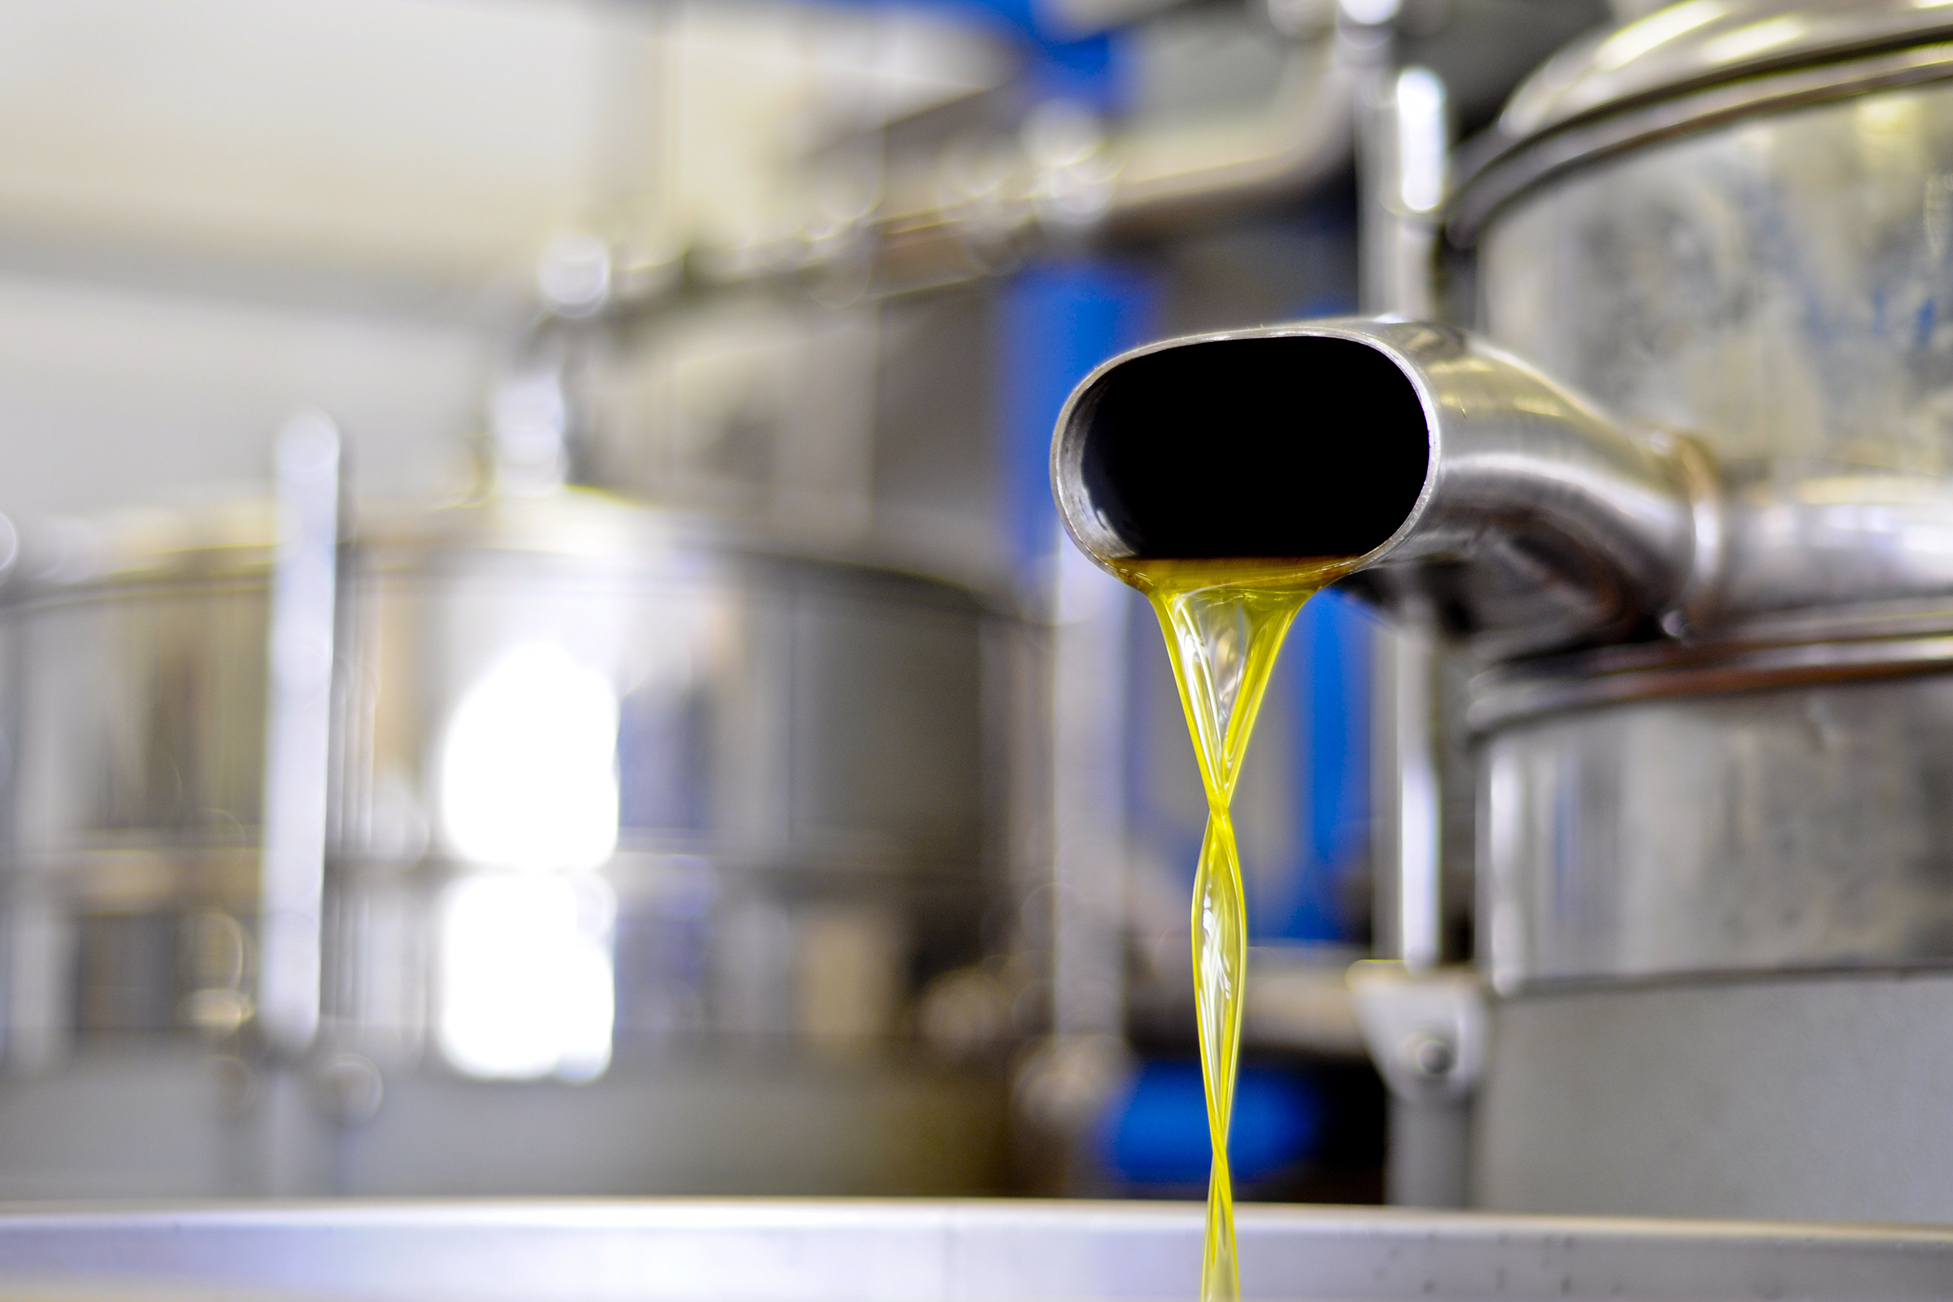 Production of olive oil